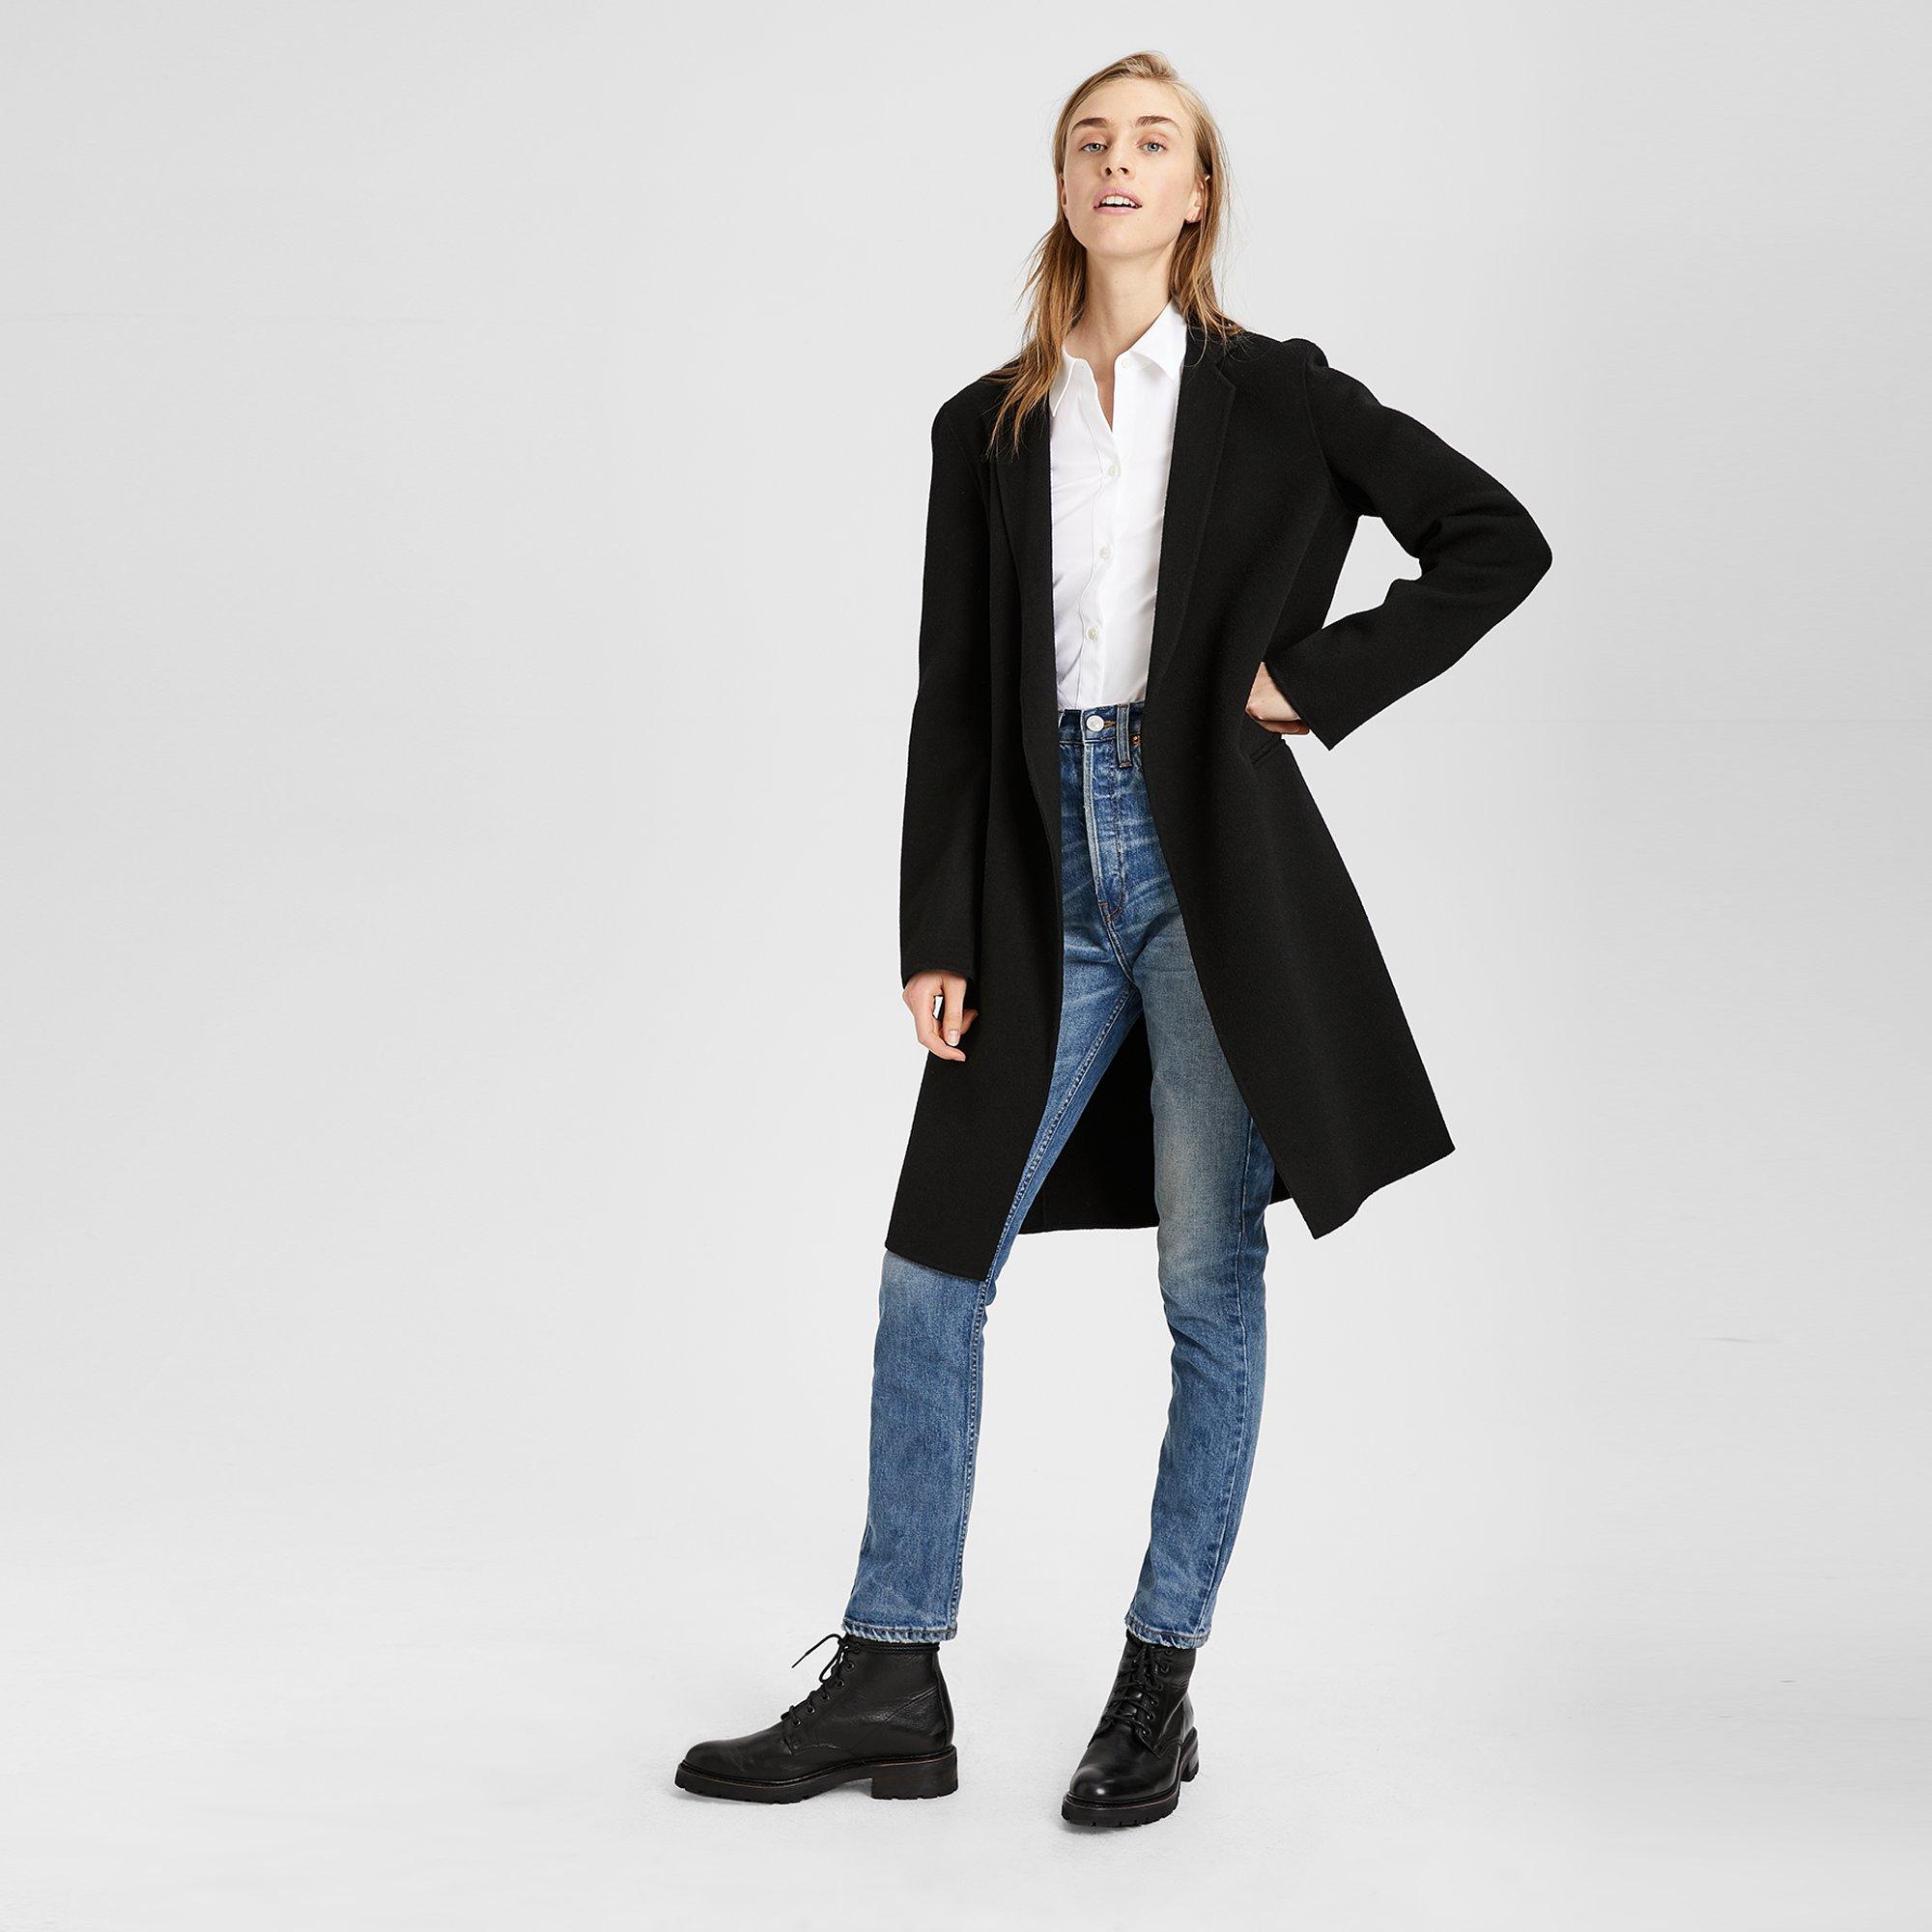 theory double faced essential coat